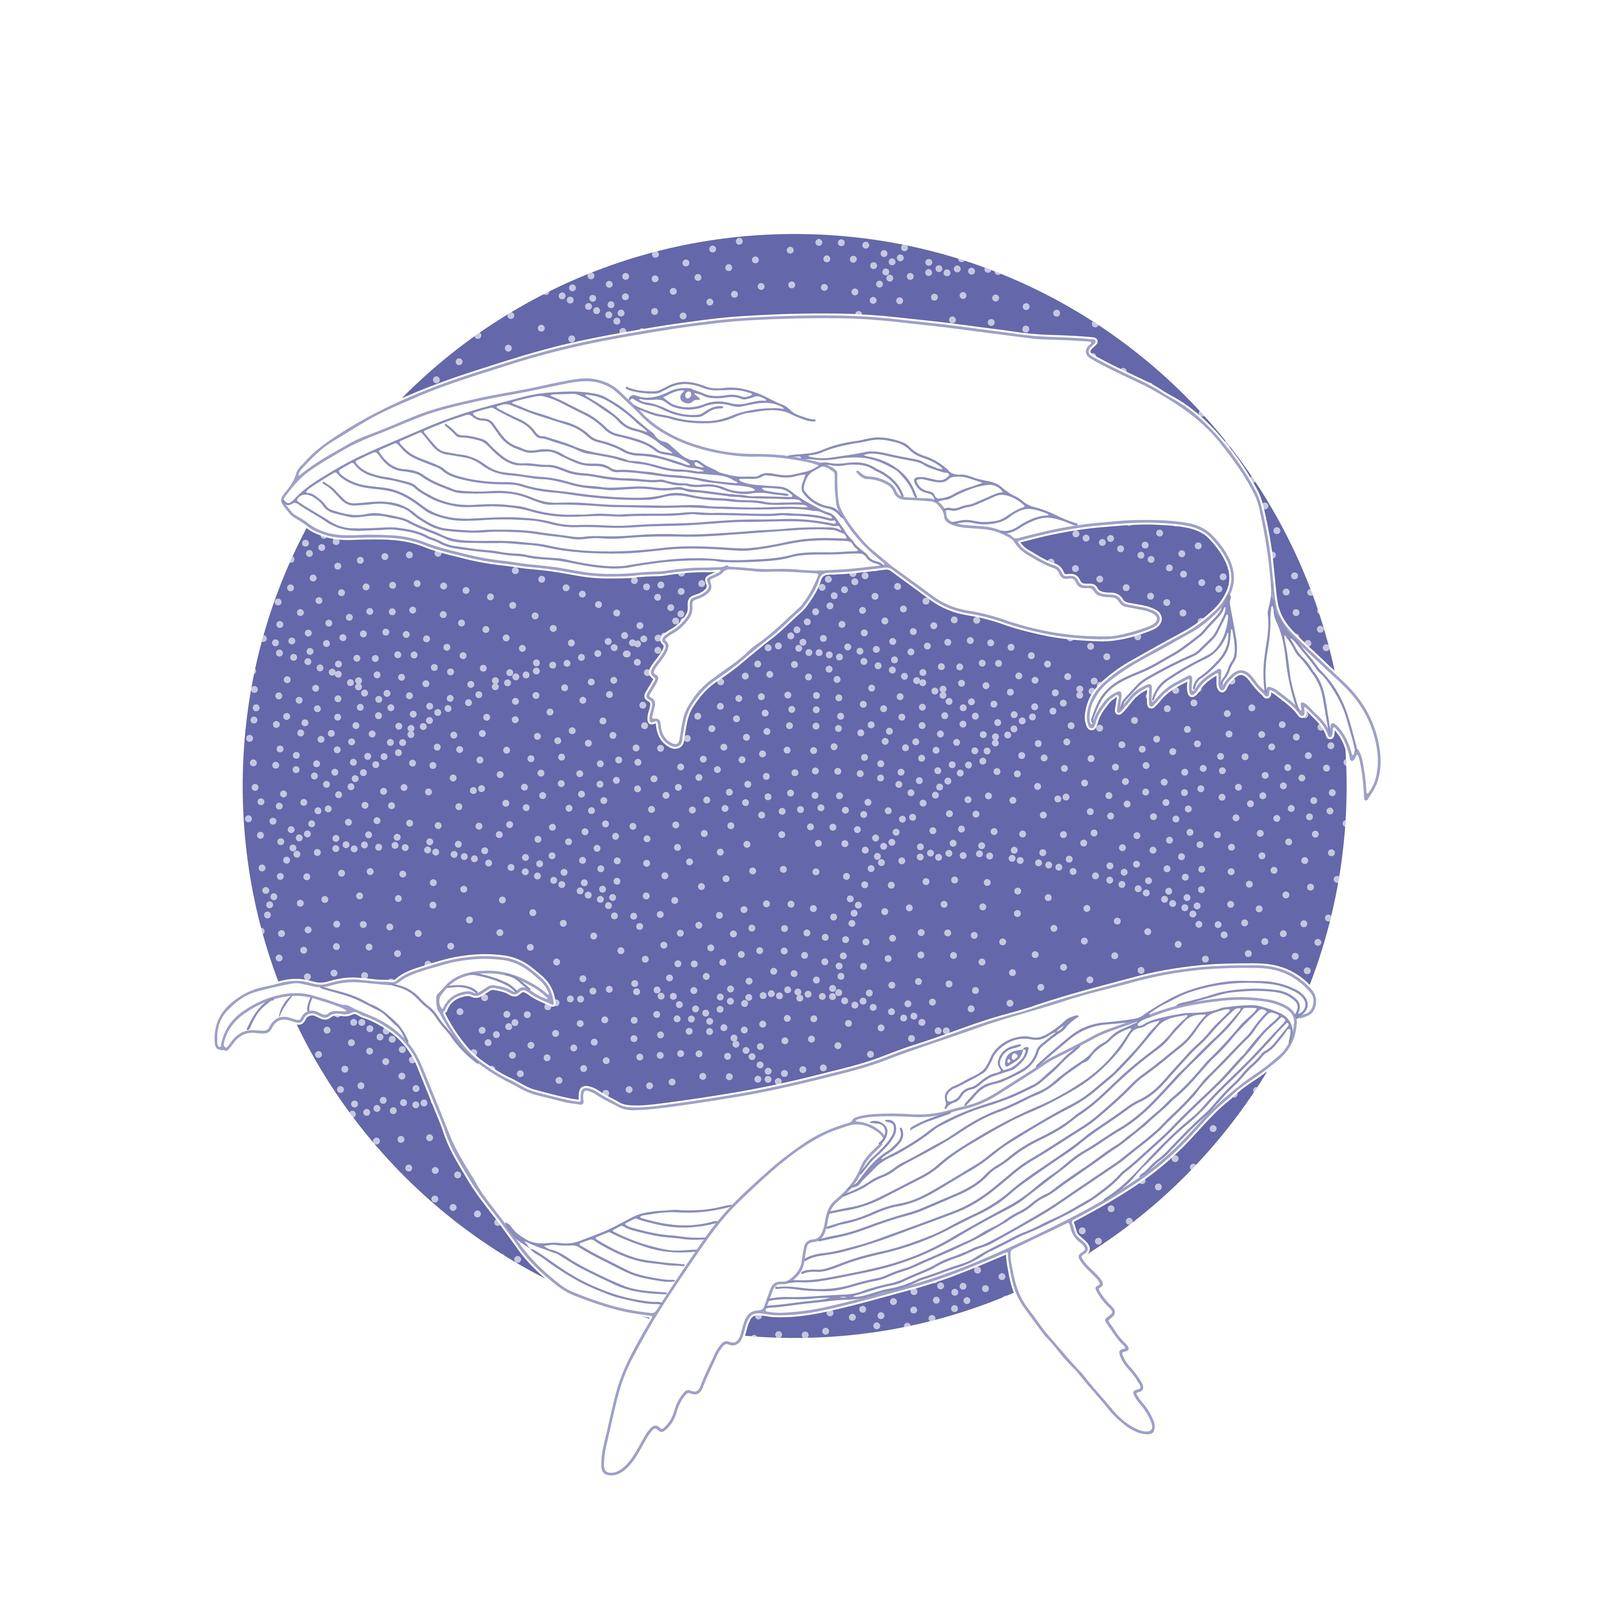 A pair of humpback whales on the waves emblem in very peri color